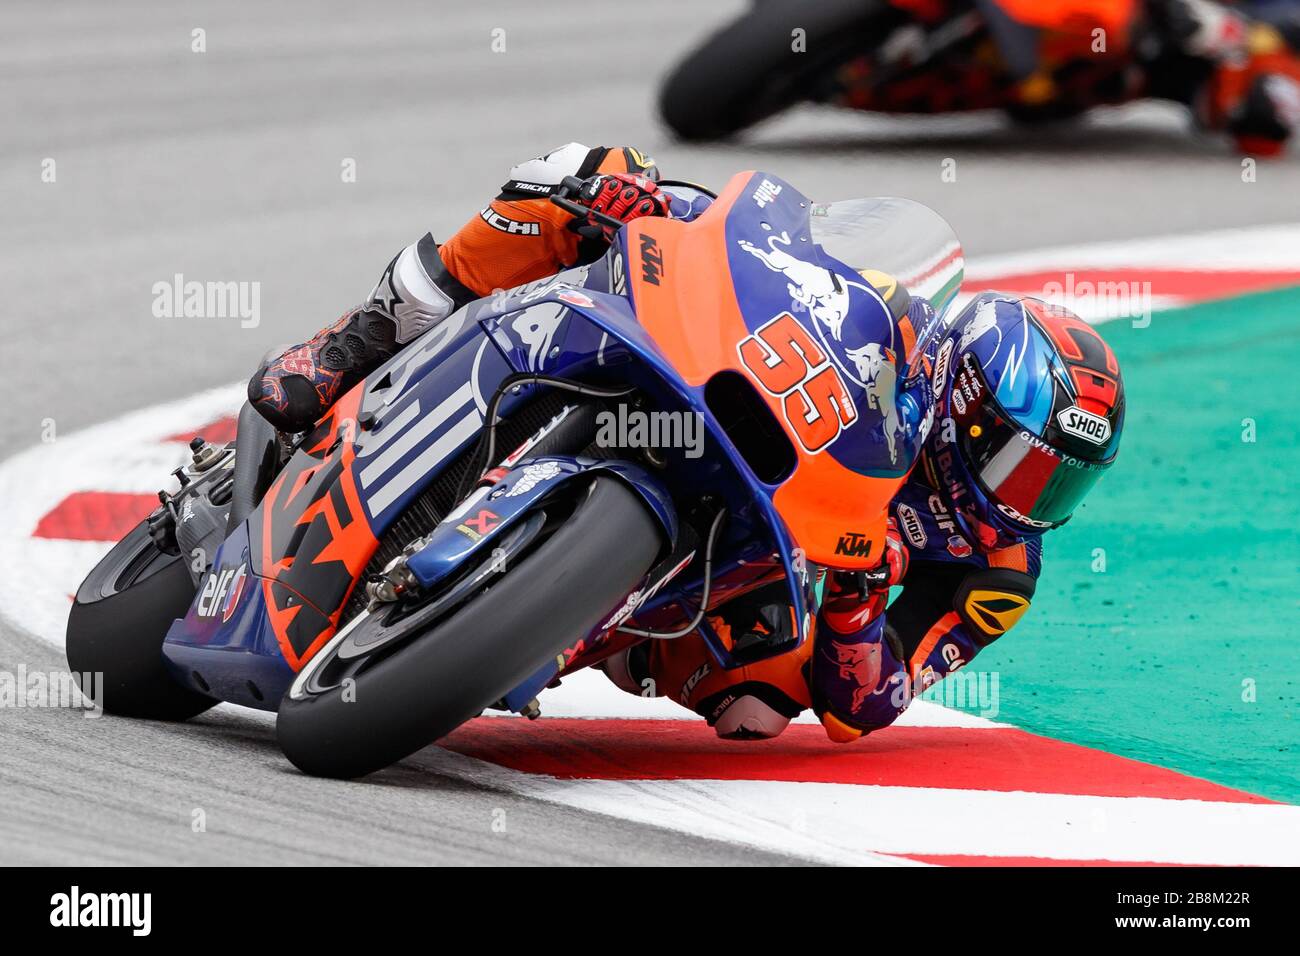 MONTMELO, SPAIN - JUNE 14: Hafizh Syahrin of Red Bull KTM Tech 3 during the  Free practice motoGP at Circuit de Catalunya on June 14, 2019 in Montmelo  Stock Photo - Alamy